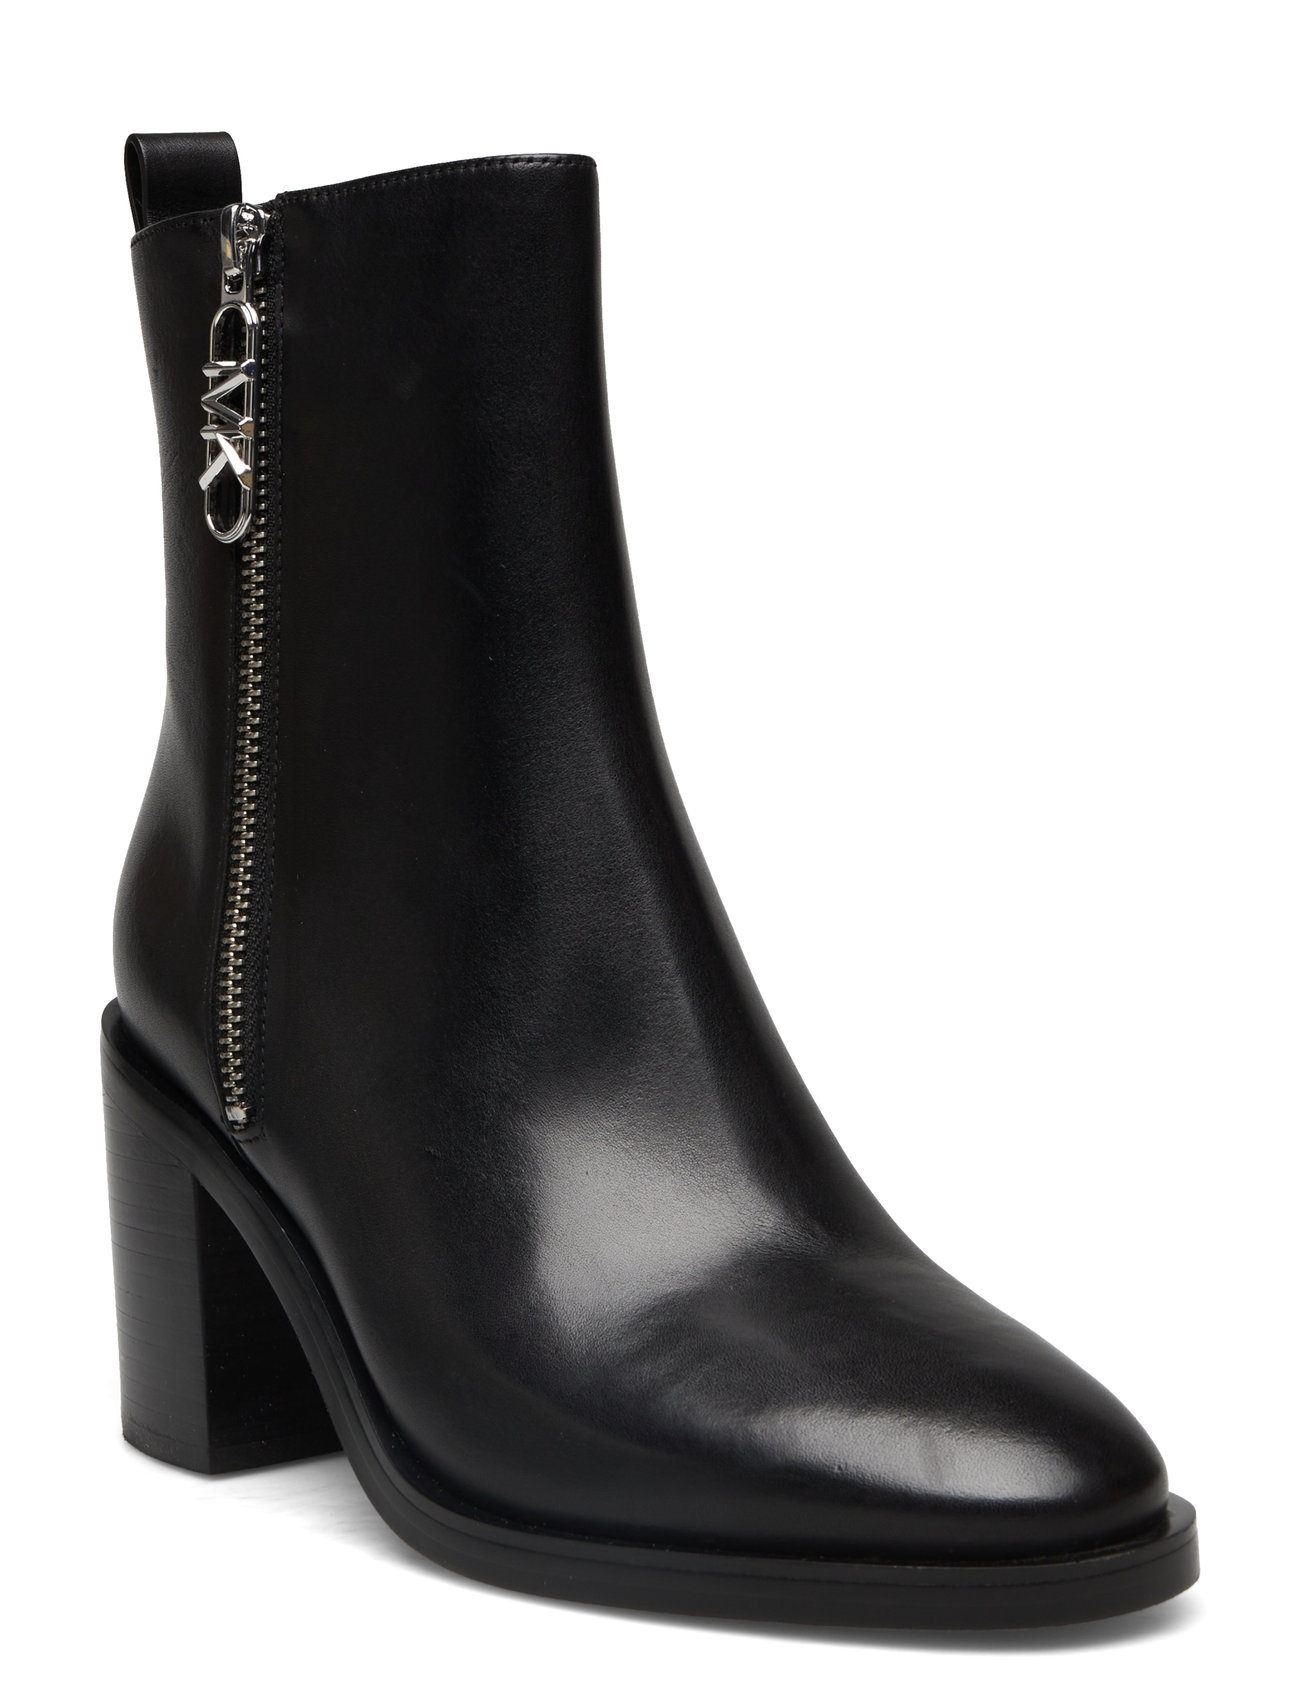 Regan Mid Bootie Shoes Boots Ankle Boots Ankle Boots With Heel Black Michael Kors